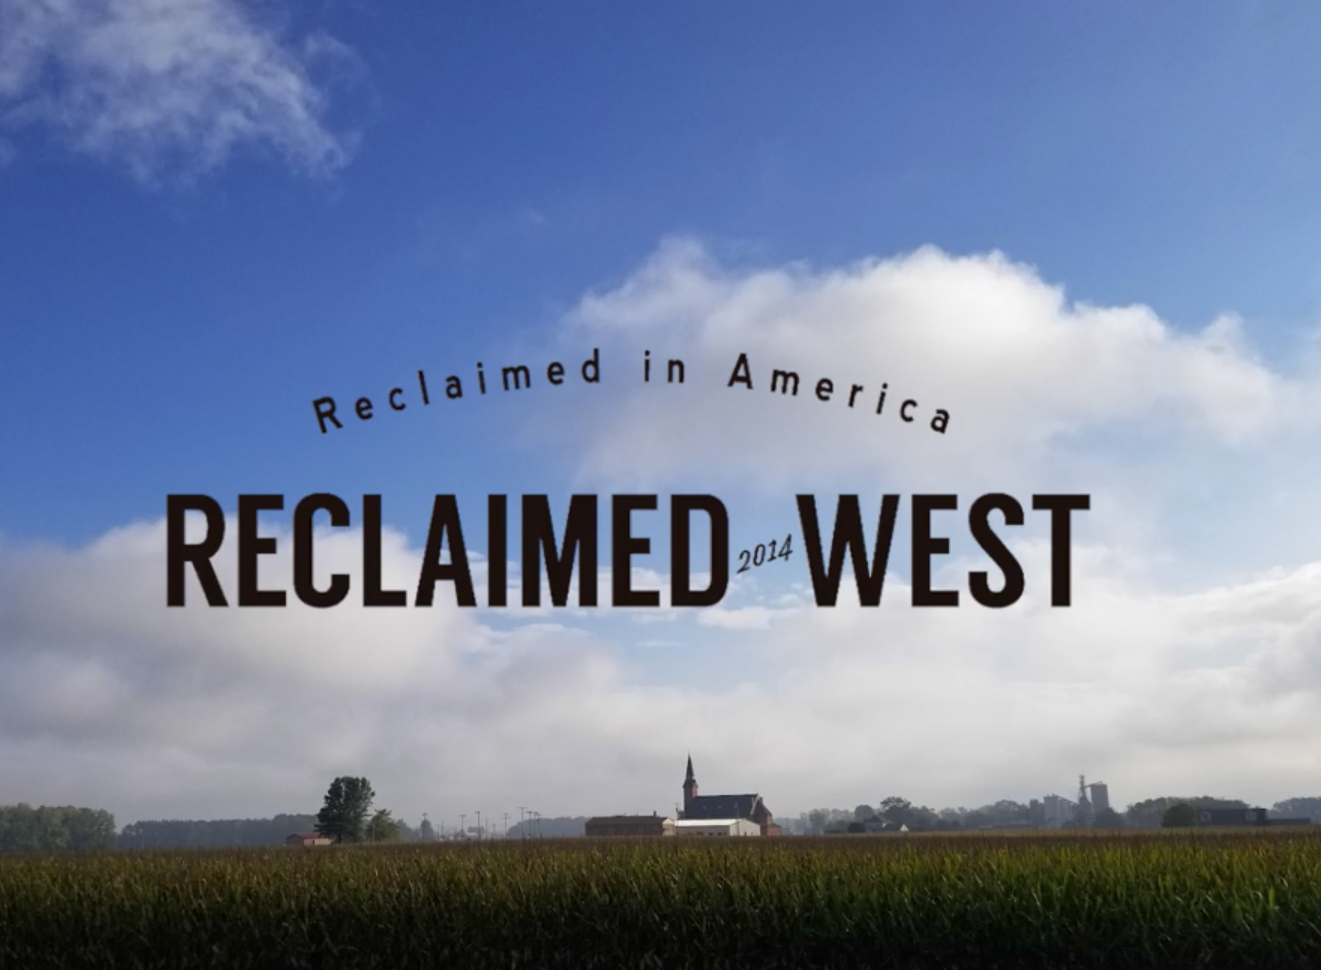 Reclaimed West